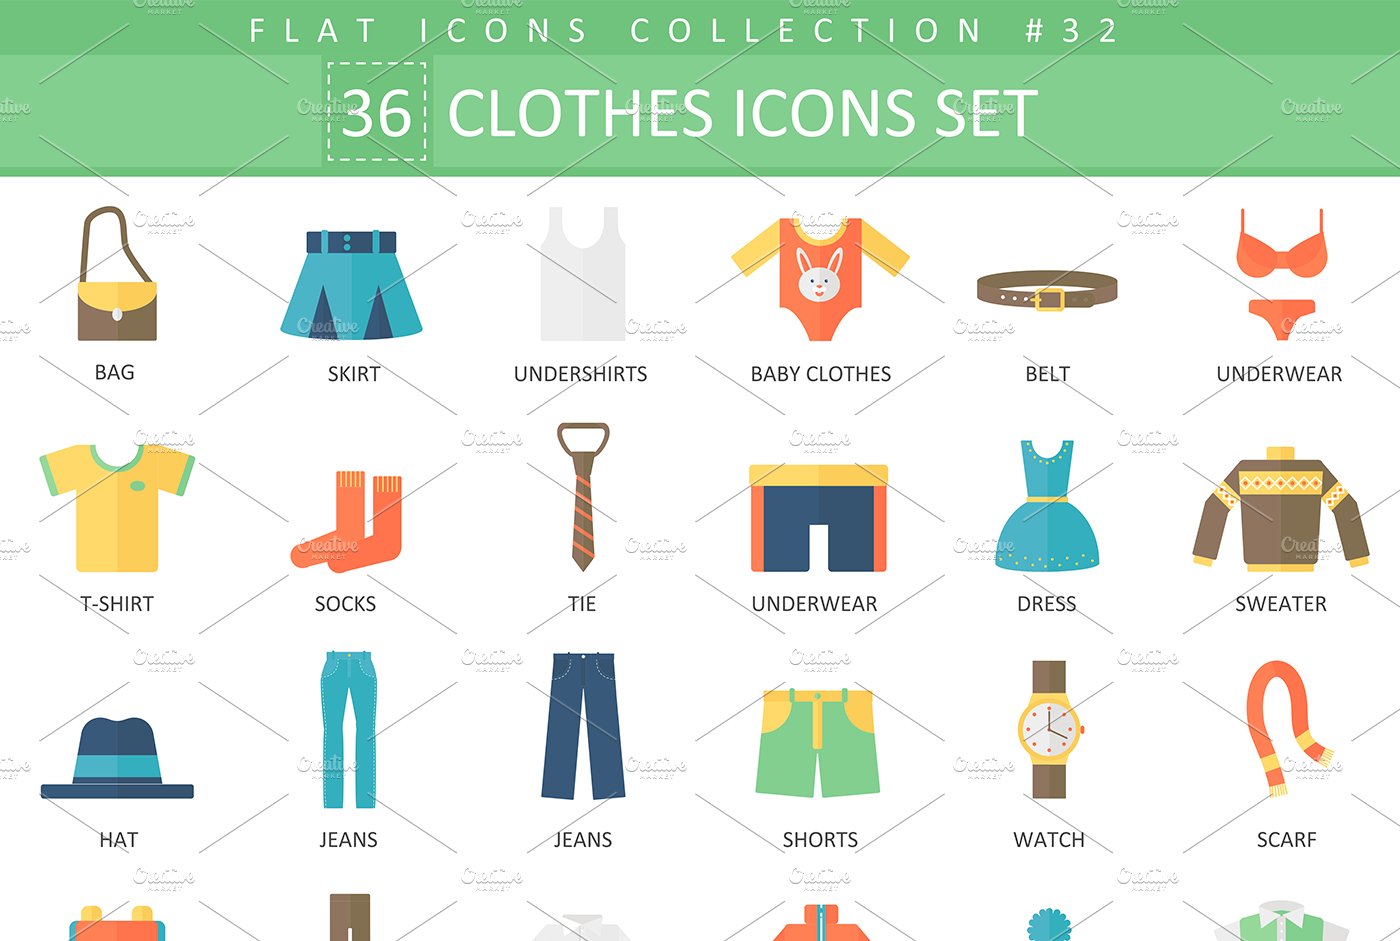 36 Clothes flat icons set. cover image.